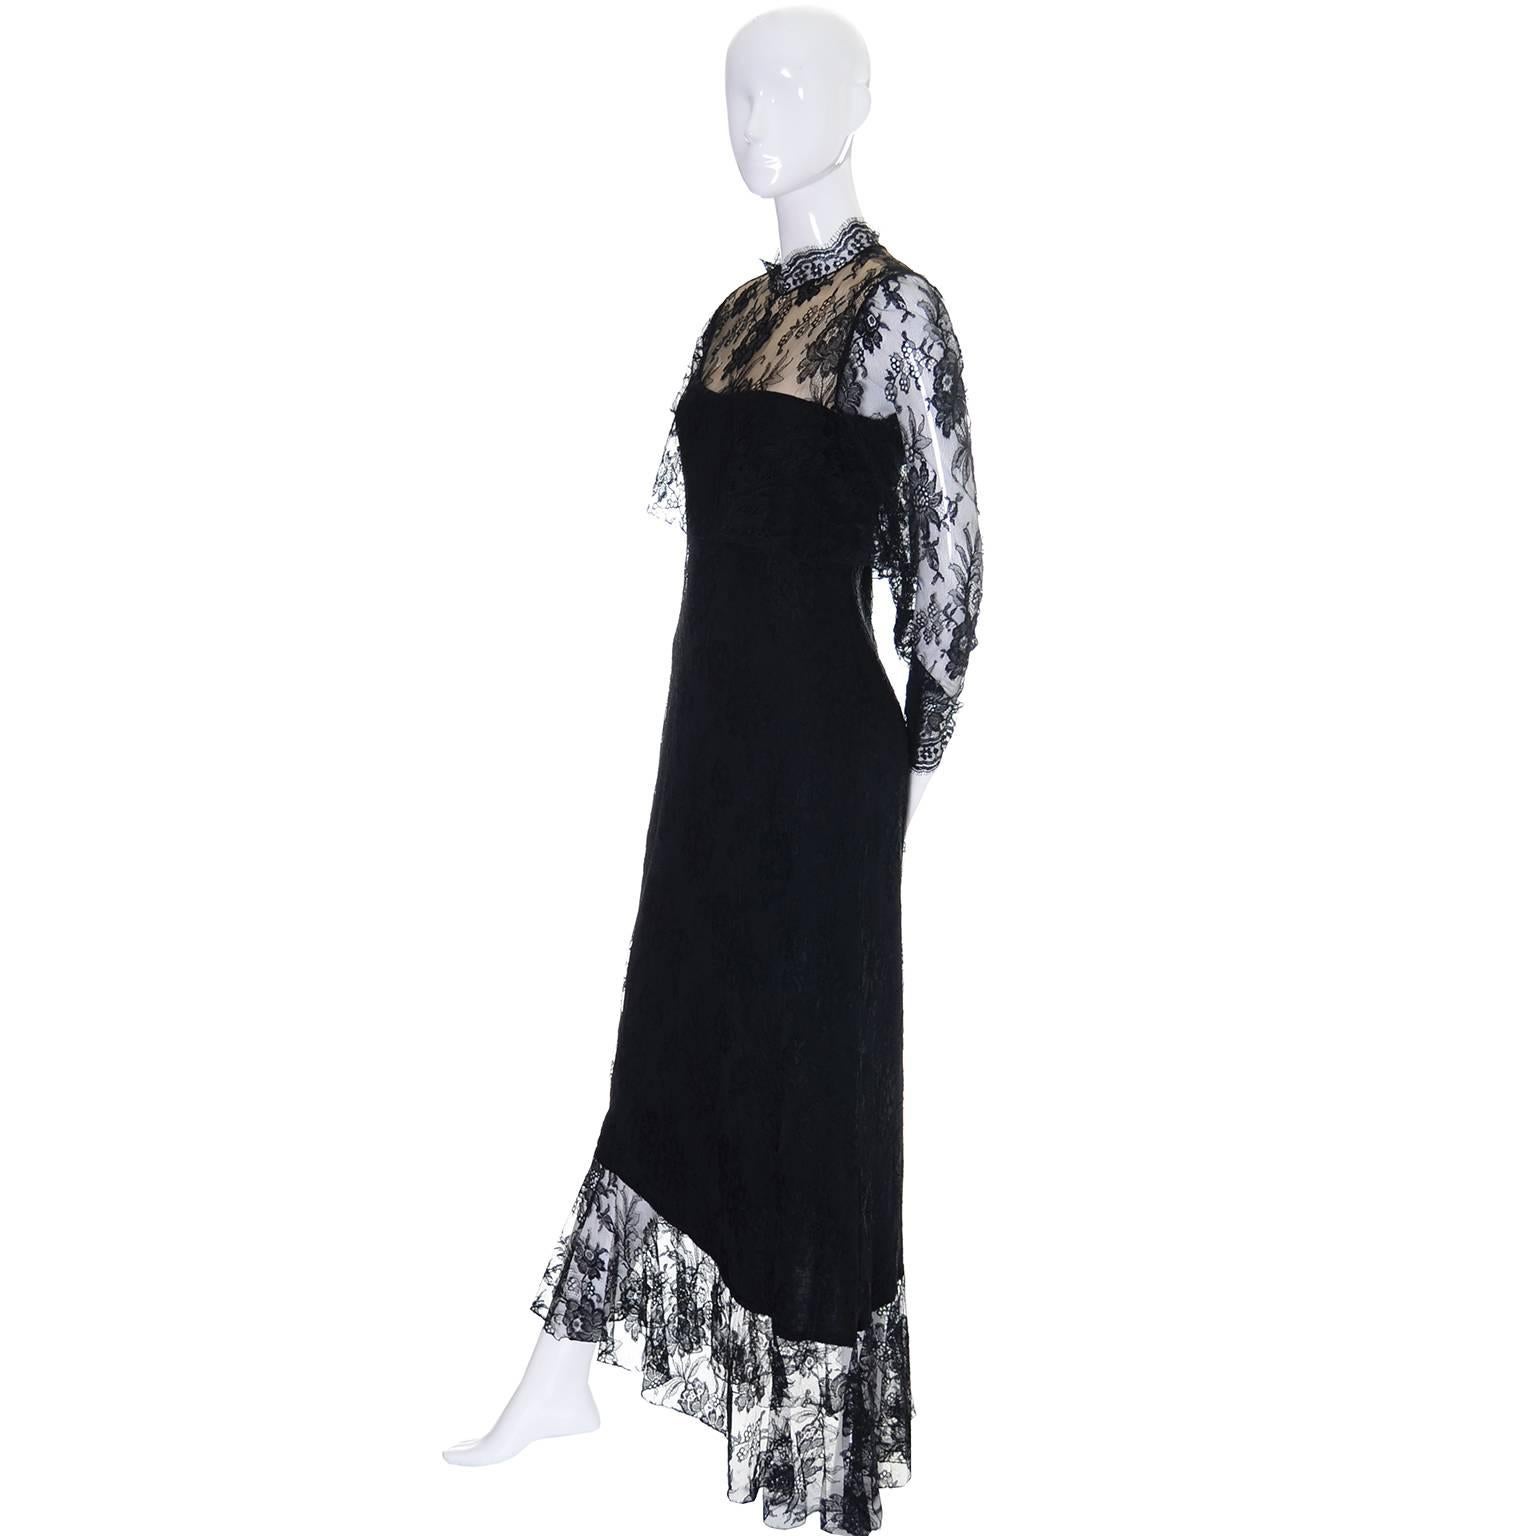 This Loris Azzaro vintage 1980's dress has a flesh toned lining in the bodice and a stretch jersey underdress with an exquisite lace overlay. This incredible vintage dress has an asymmetrical hemline, zippers on the cuffs, and a zipper up the back.